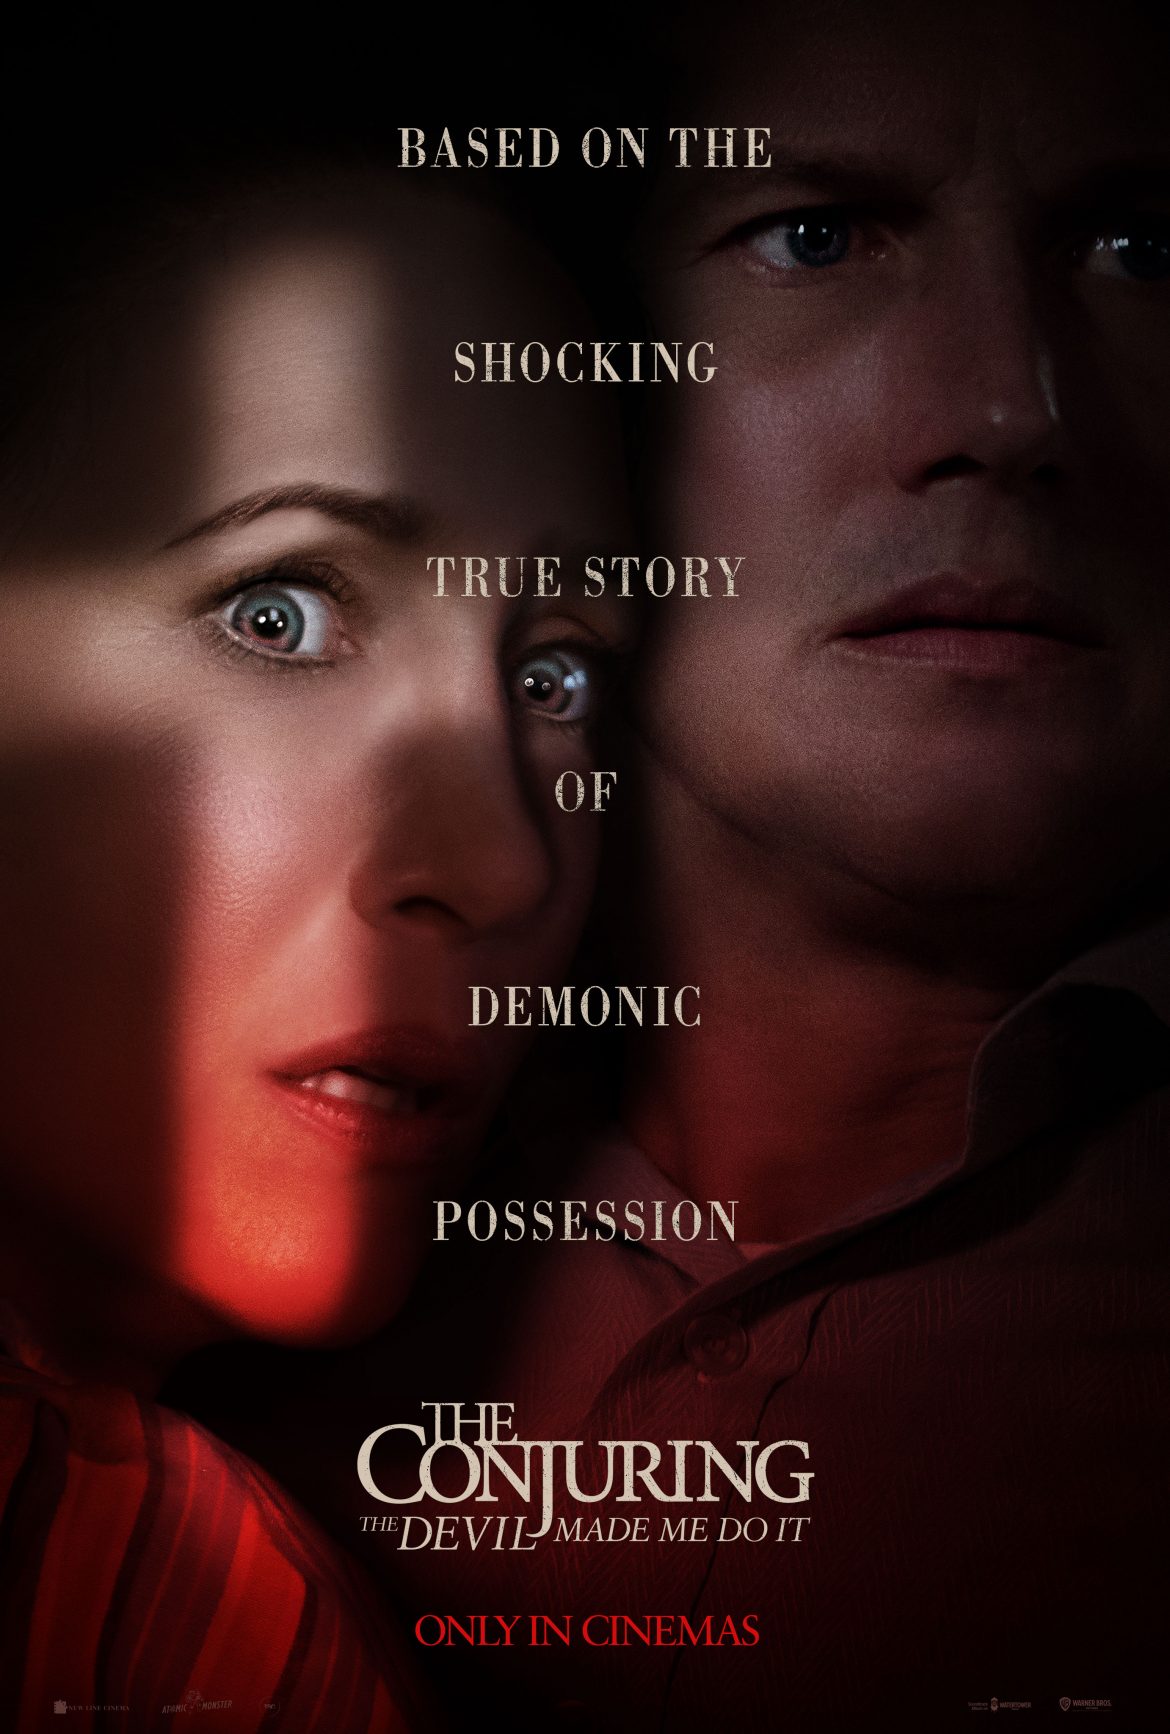 Watch the First Trailer of The Conjuring: The Devil Made Me Do It